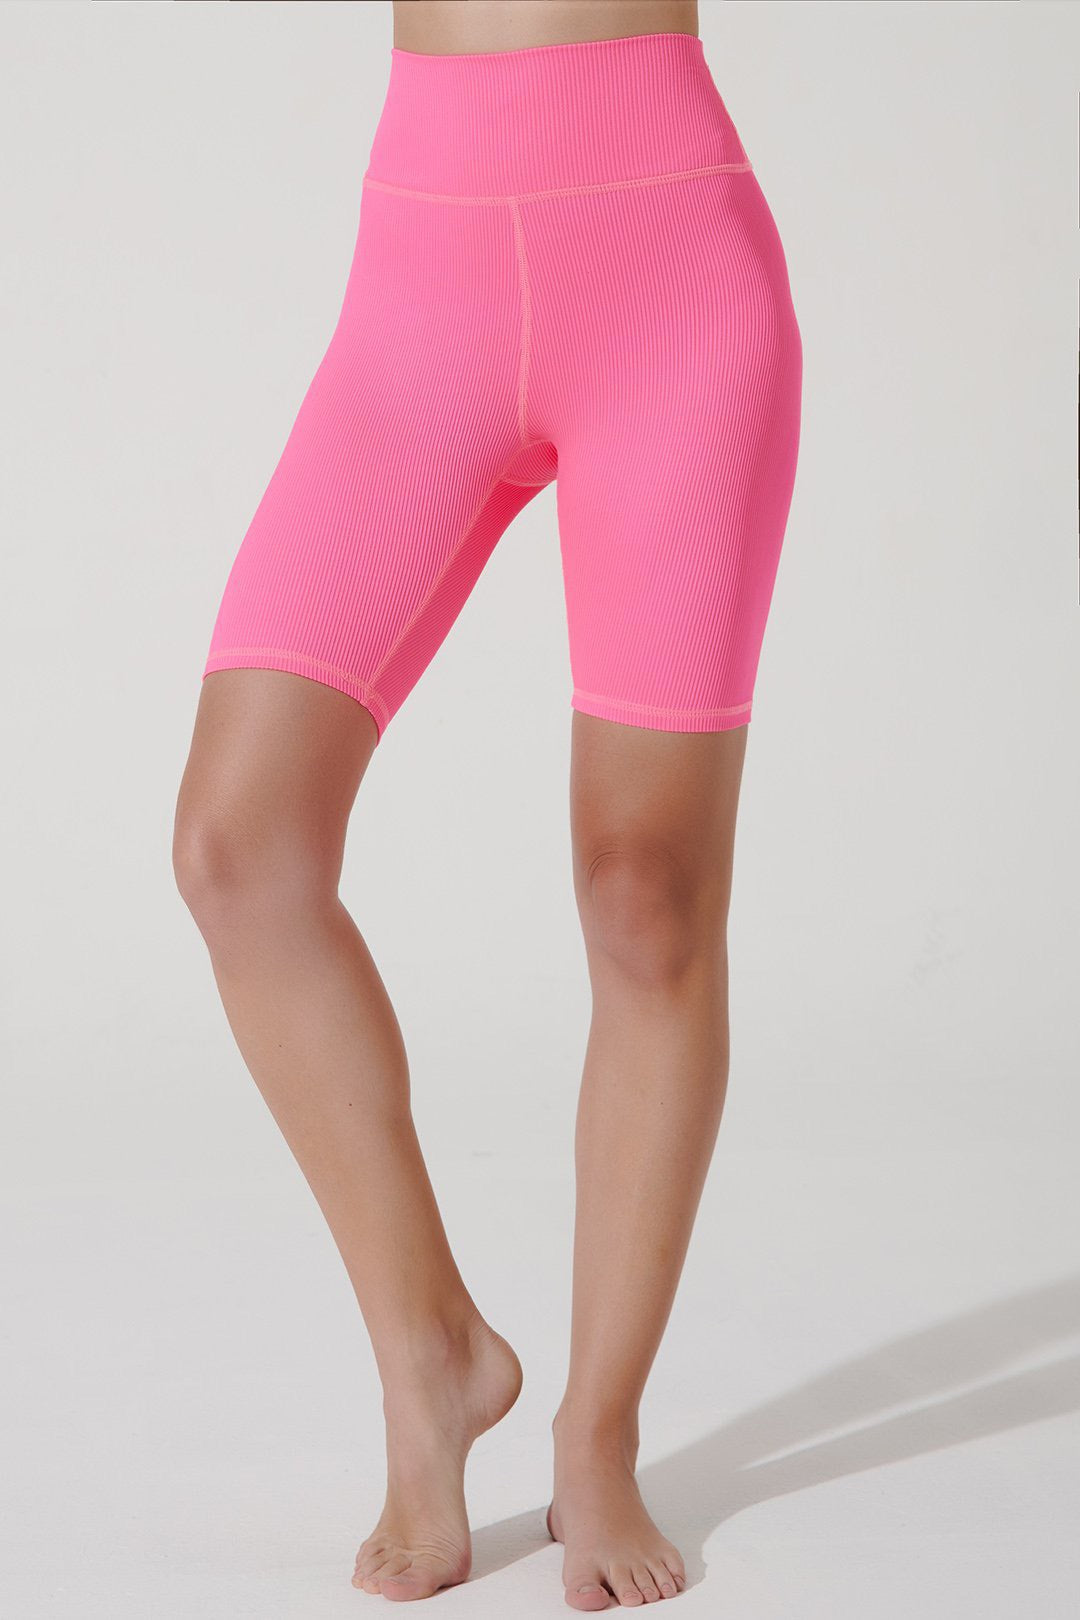 Hot pink ribbed women's shorts with a biker style, perfect for a stylish summer look.